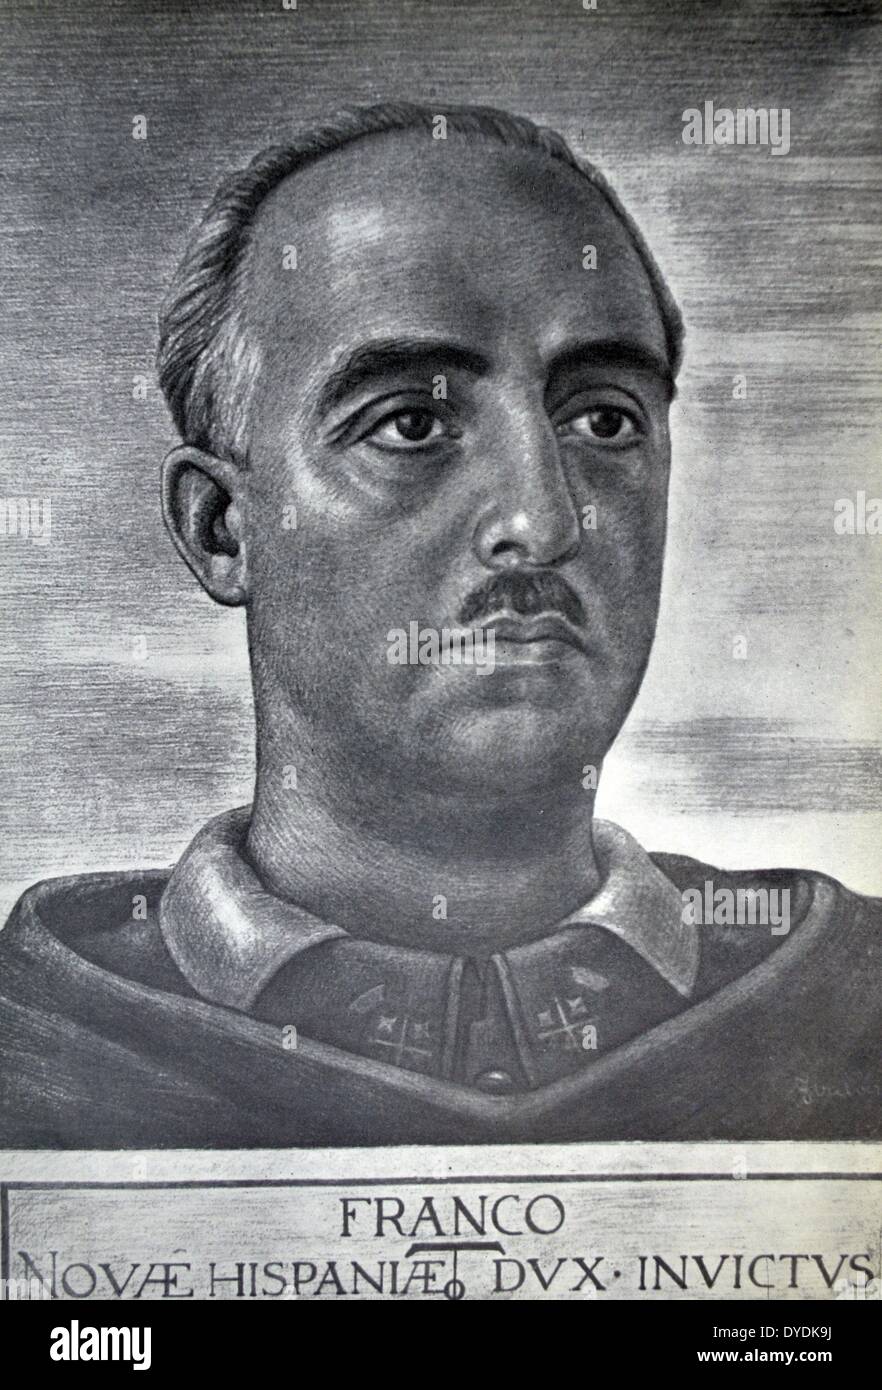 Francisco Franco (1892 – 1975) Spanish military leader who ruled as the dictator of Spain from 1939 until his death. He came to power during the Spanish Civil War while serving as the Generalissimo of the Nationalist faction. Stock Photo